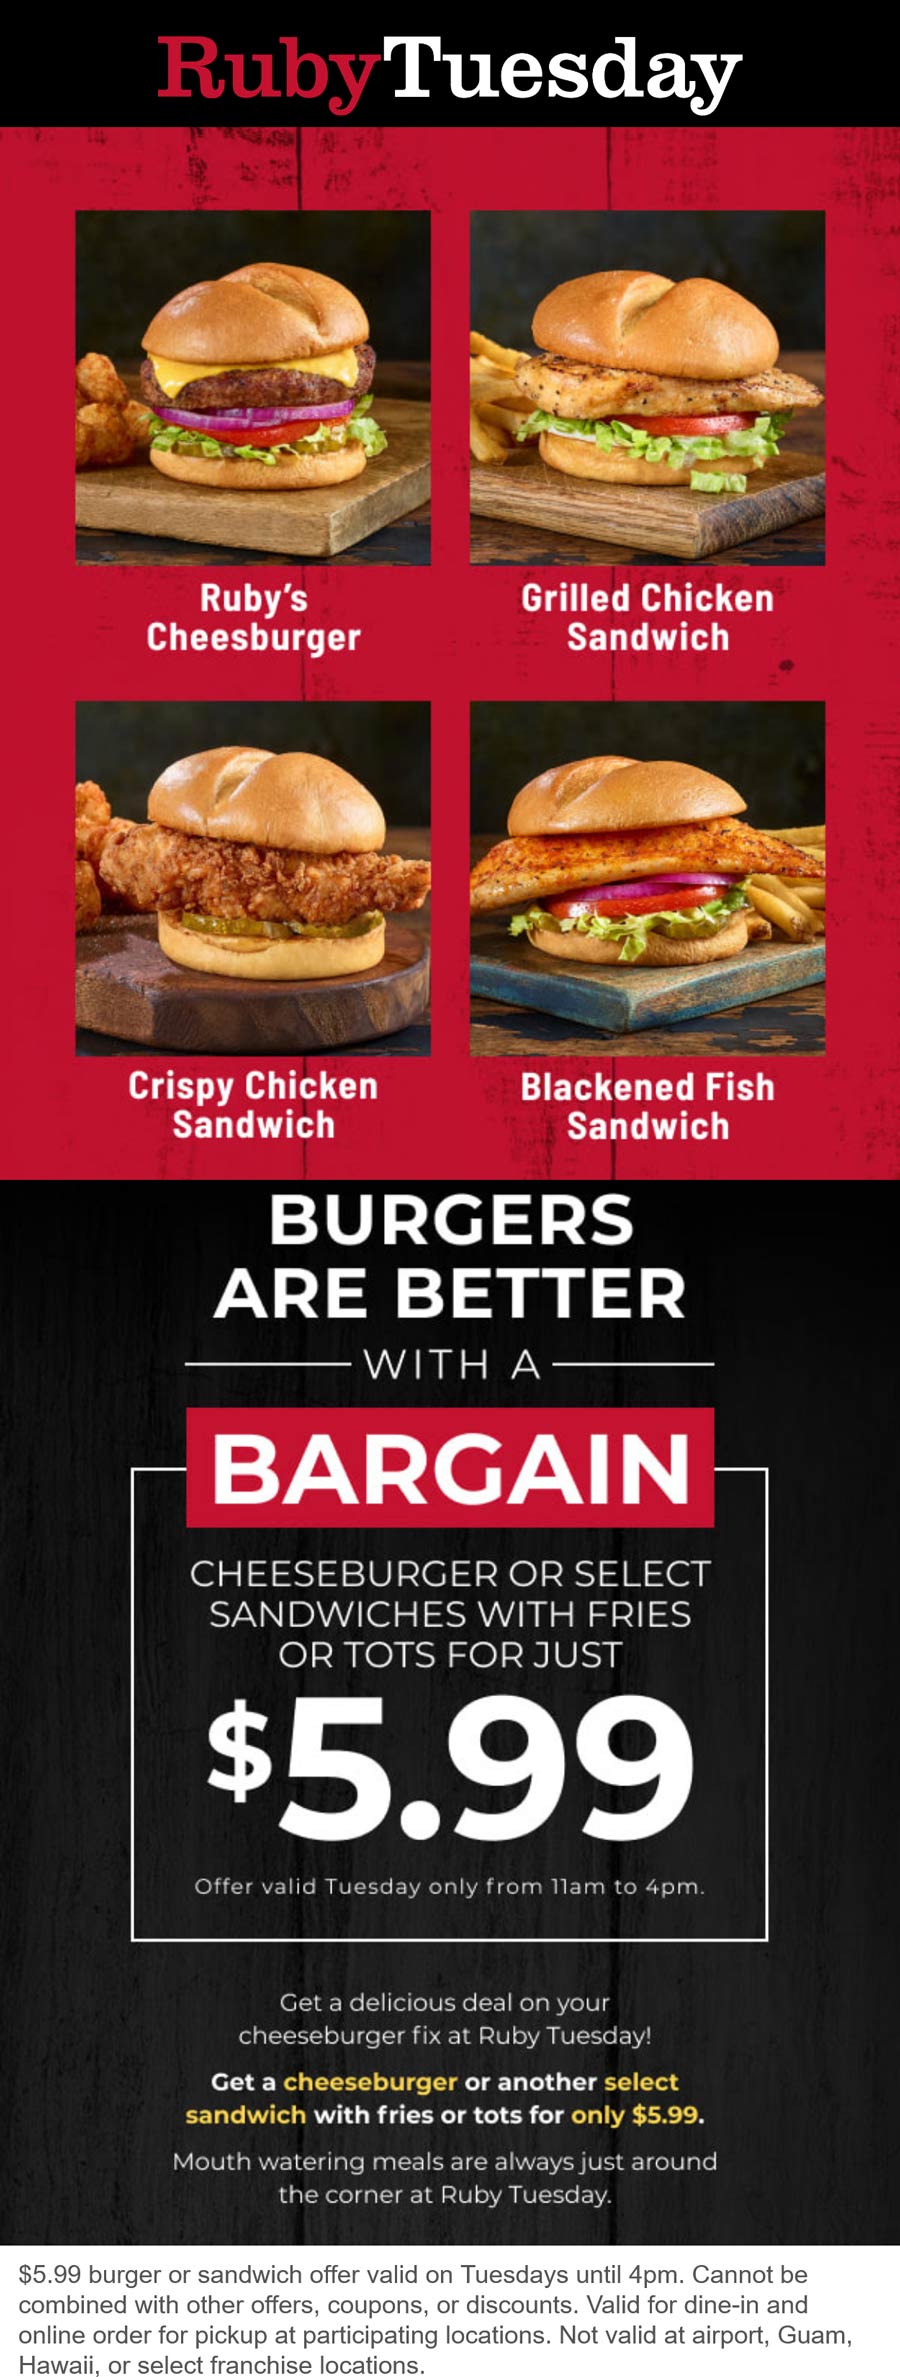 Ruby Tuesday restaurants Coupon  Cheeseburger, chicken or fish sandwich + fries = $6 til 4p today at Ruby Tuesday #rubytuesday 